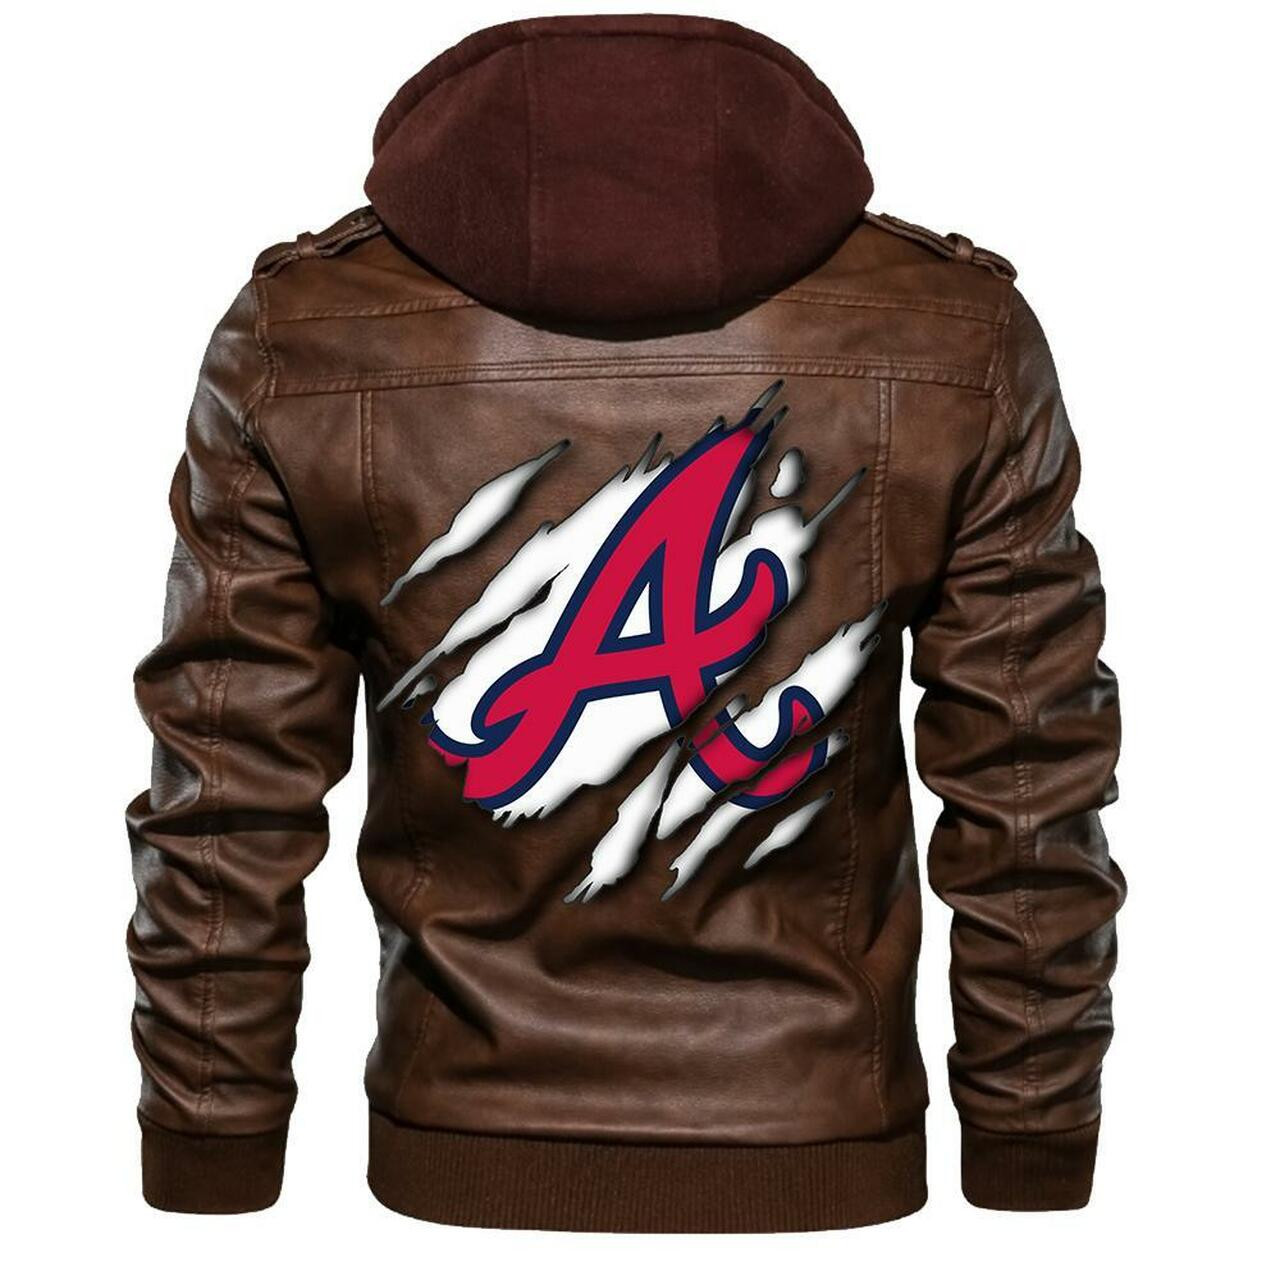 Top leather jacket can keep you warm on cooler days 223